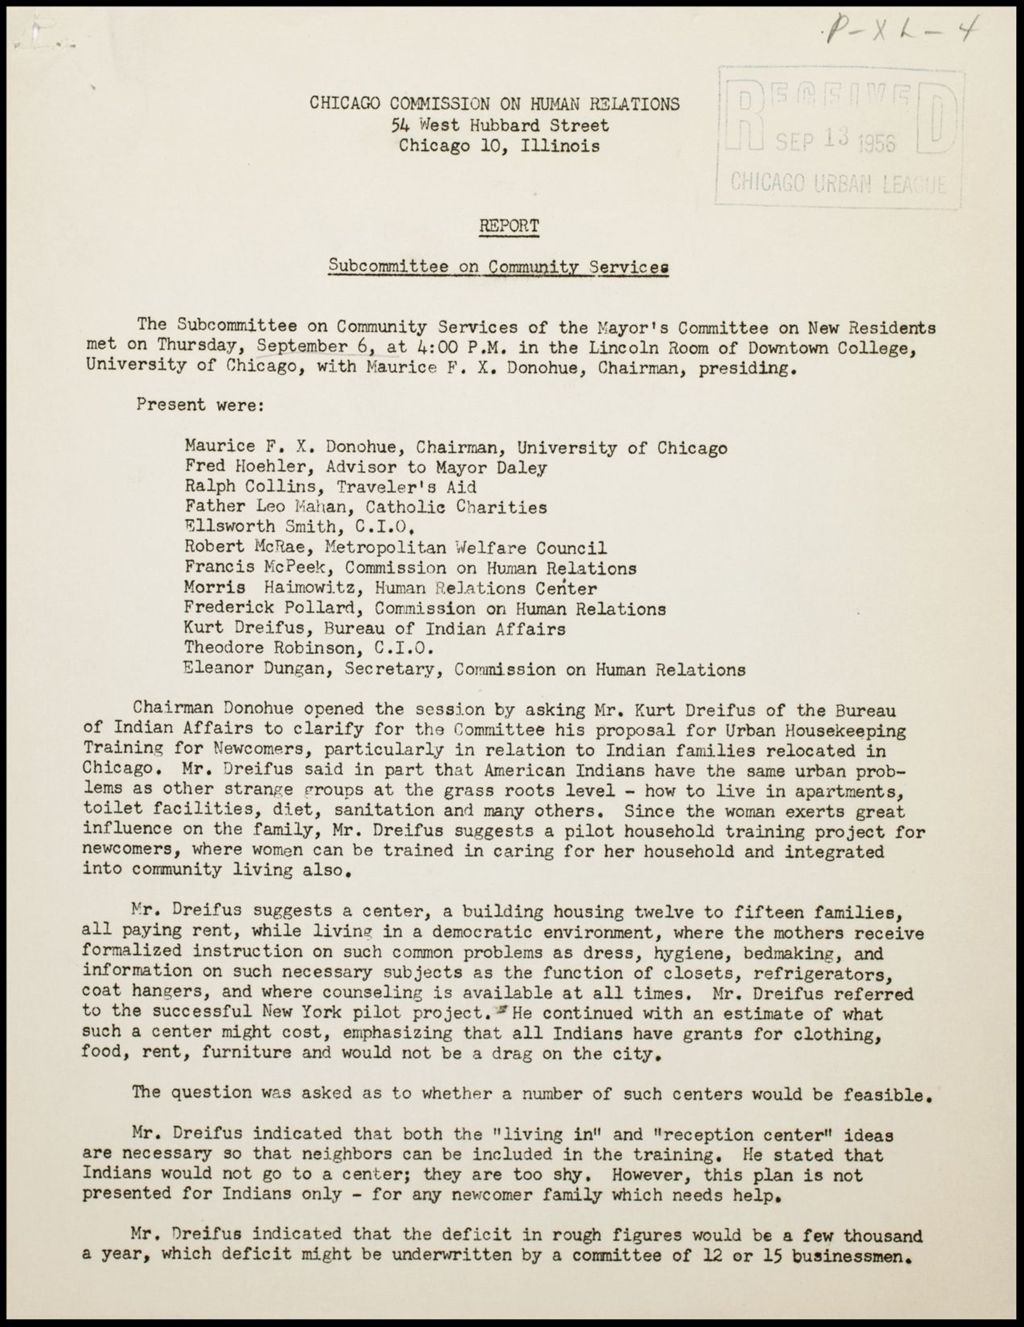 Miniature of Commission on Human Relations - subcommittee on public services, 1956 (Folder I-2840)